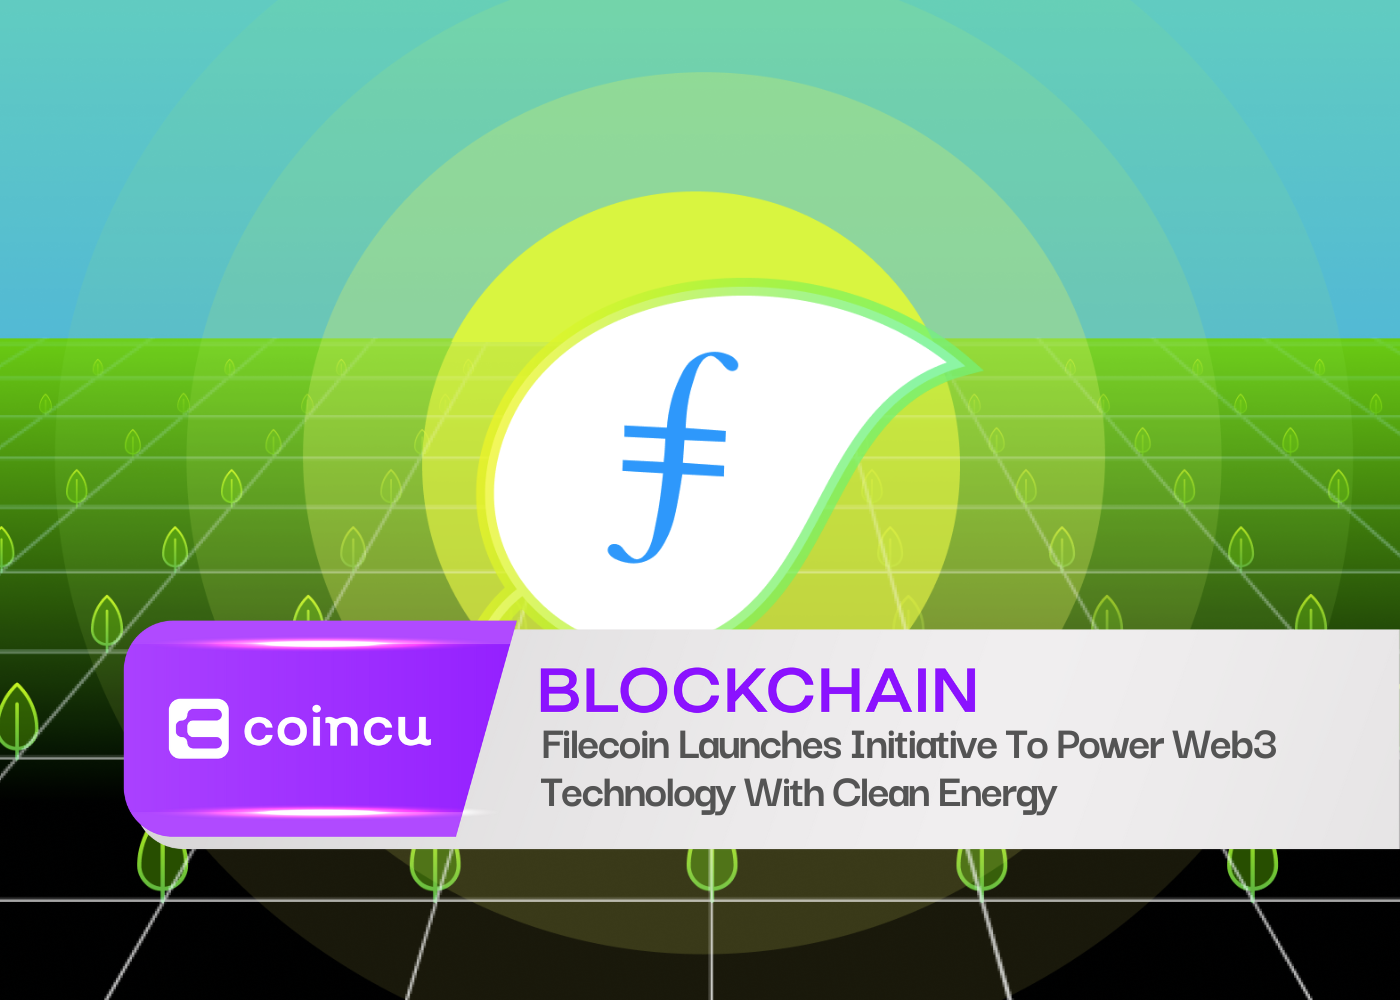 Filecoin Launches Initiative To Power Web3 Technology With Clean Energy